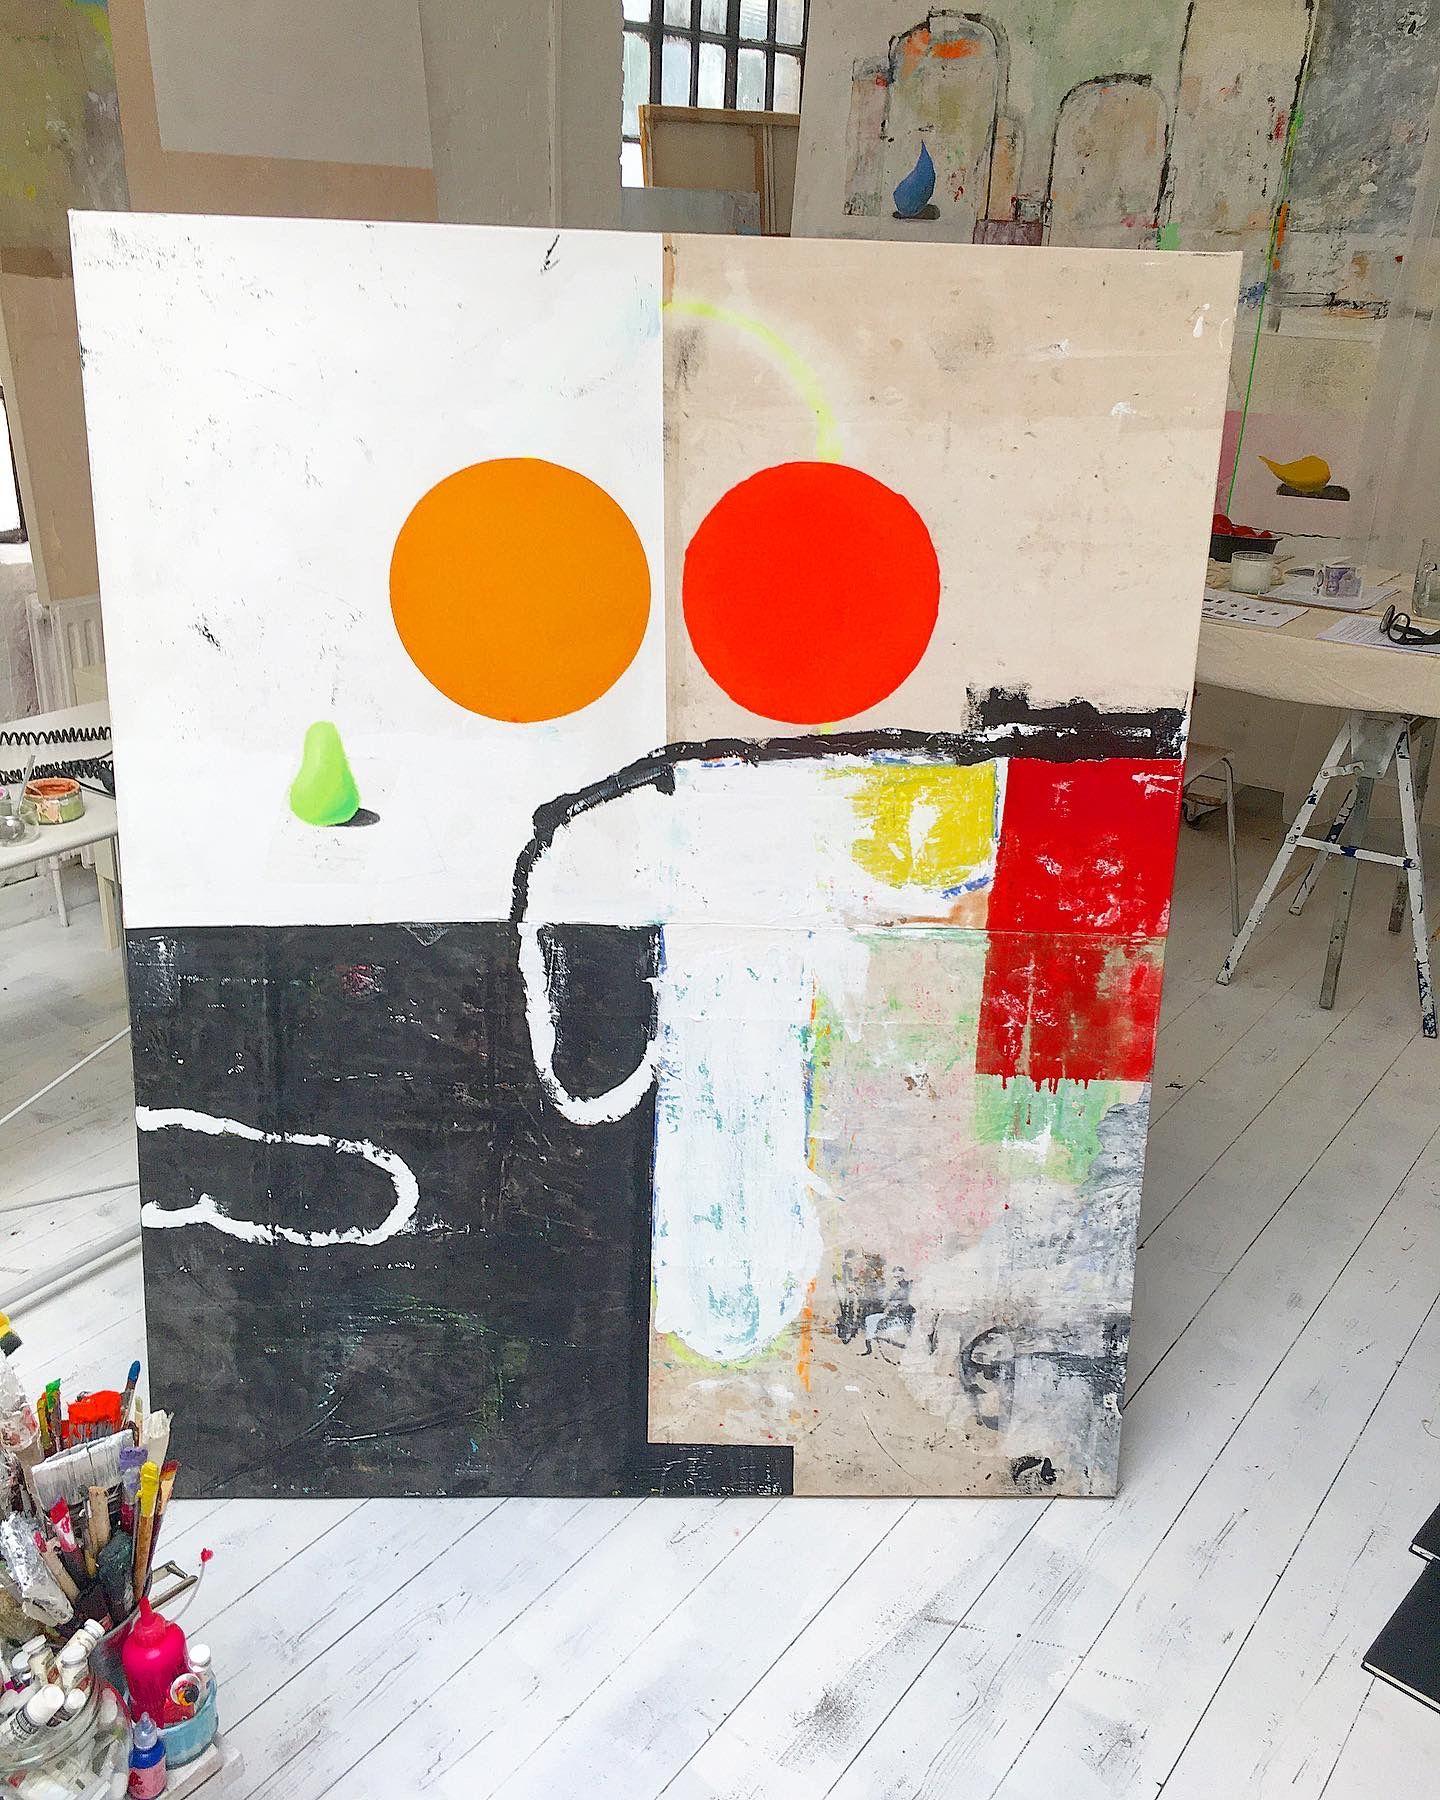 Wonderful and humorous   Large format oil painting   on a raw unprimed and stitched  canvas. RK's Signature   technic/process makes this piece   super special.  Started in 2012 and completed   In 2020 in London, England.  :: Painting :: Abstract ::